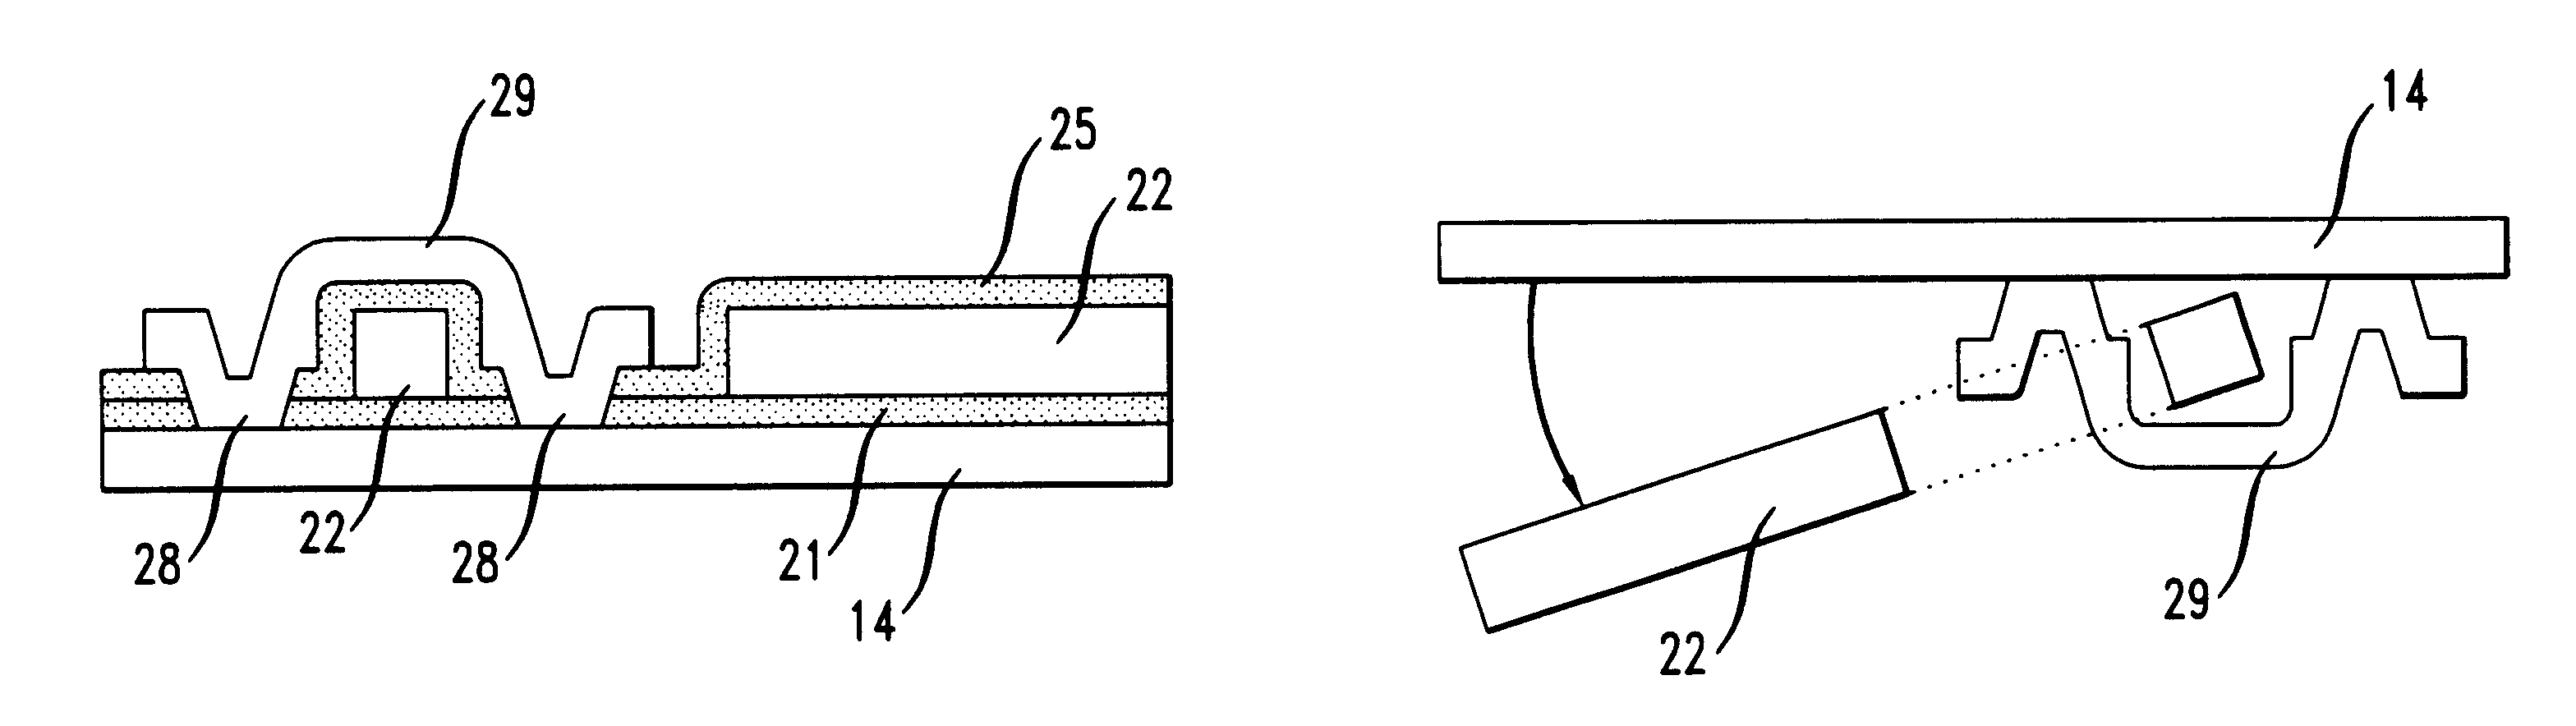 Process for fabricating micromechanical devices